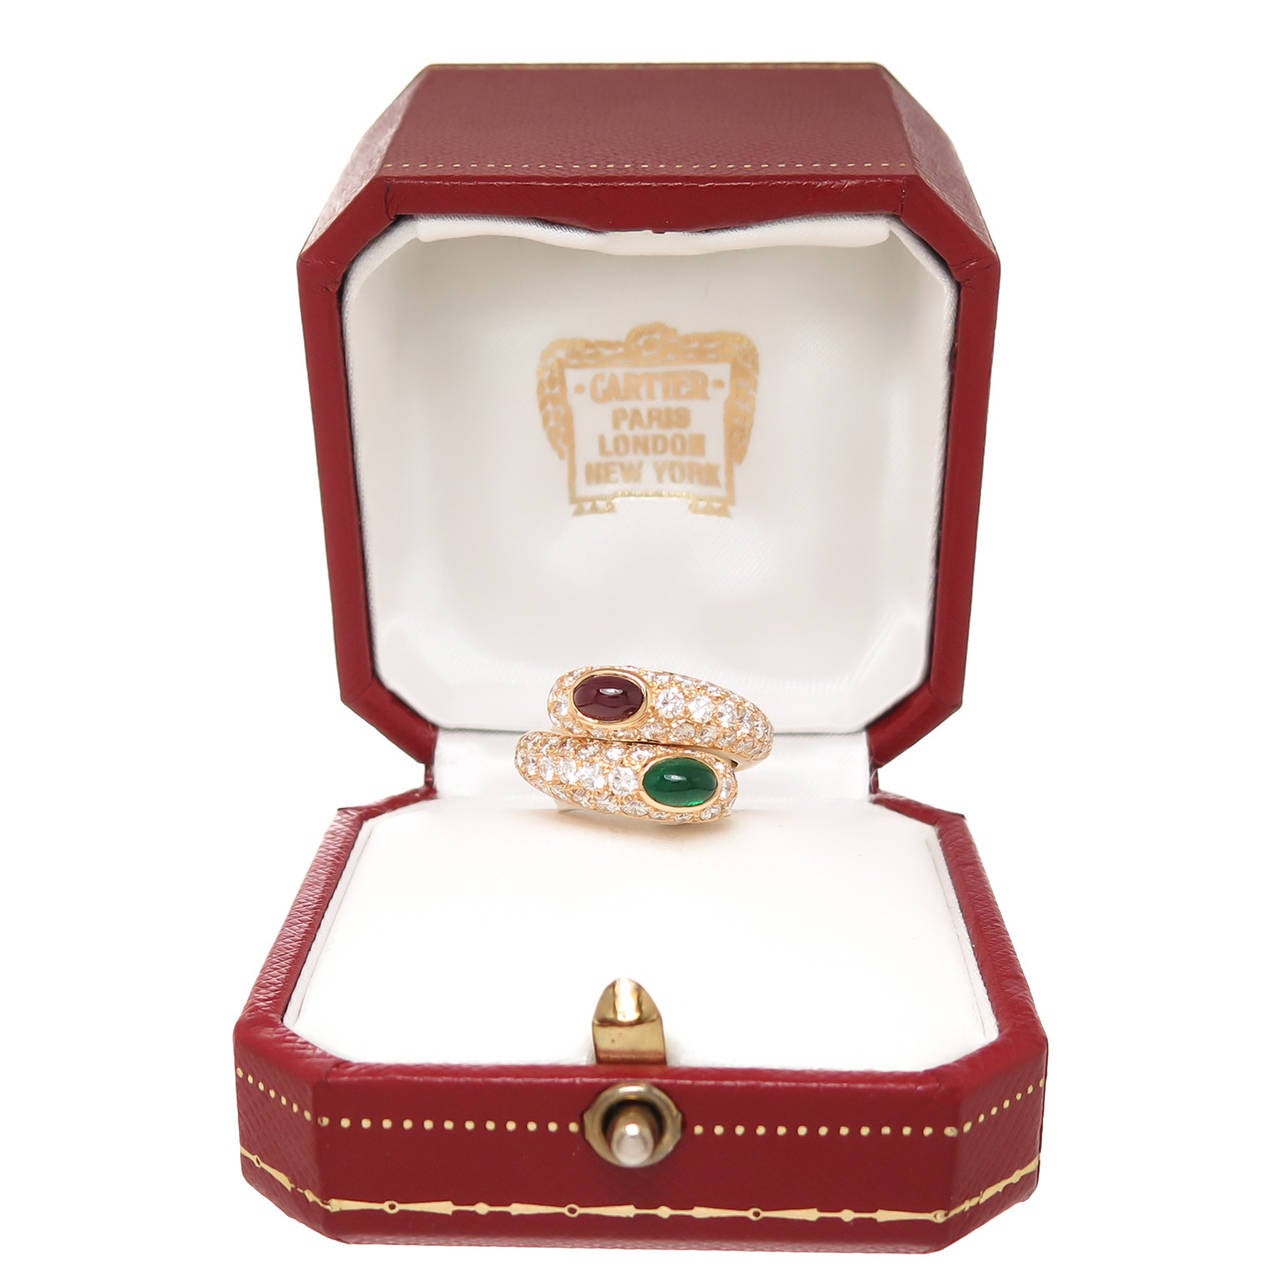 Circa 1990s Cartier 18k Yellow Gold Bypass Ring, centrally set with a very Fine Color Cabochon Ruby and Emerald, each approximately 3/4 Carat. Further set with Fine White Round Brilliant cut Diamonds totaling 2.50 Carats. Signed and Numbered.